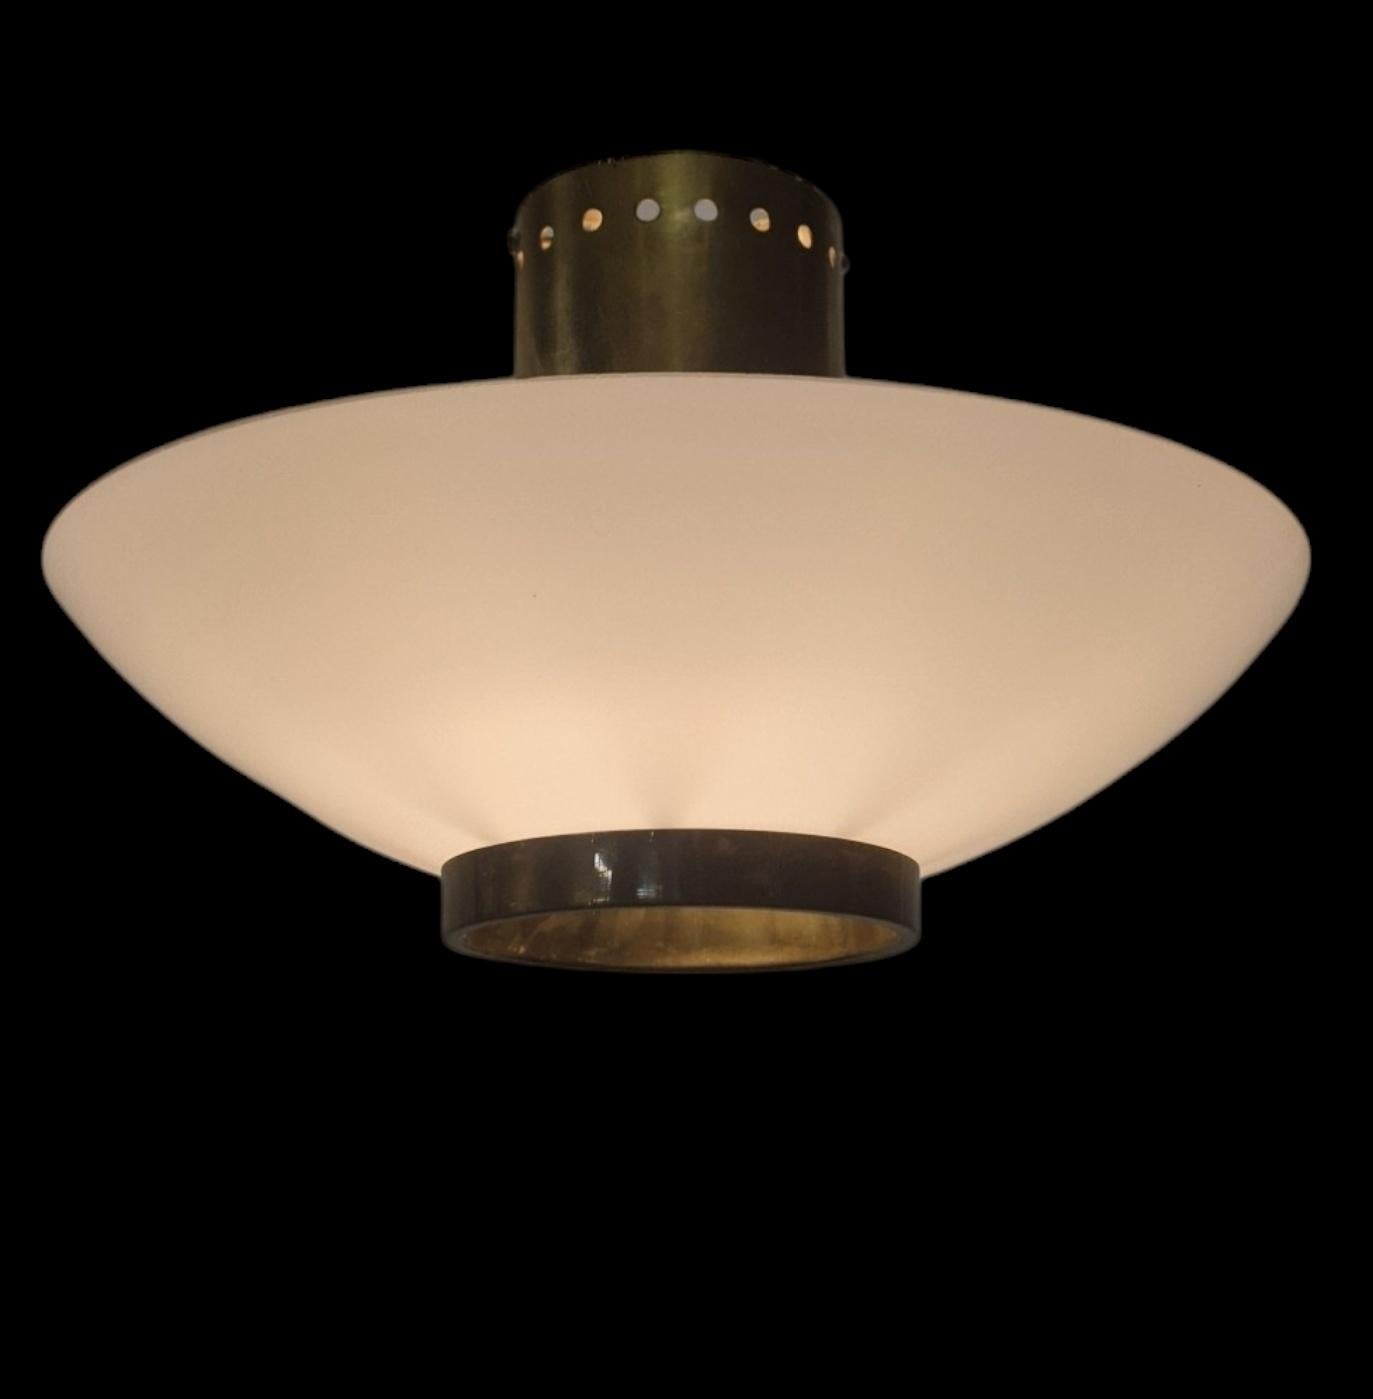 A rare and beautiful modernistic ceiling lamp by Itsu from the 1950s. Itsu was one of the leading lamp manufacturers in Finland during the middle of the 20th century. Along with companies like Taito Oy, Idman and Orno they defined what Finnish